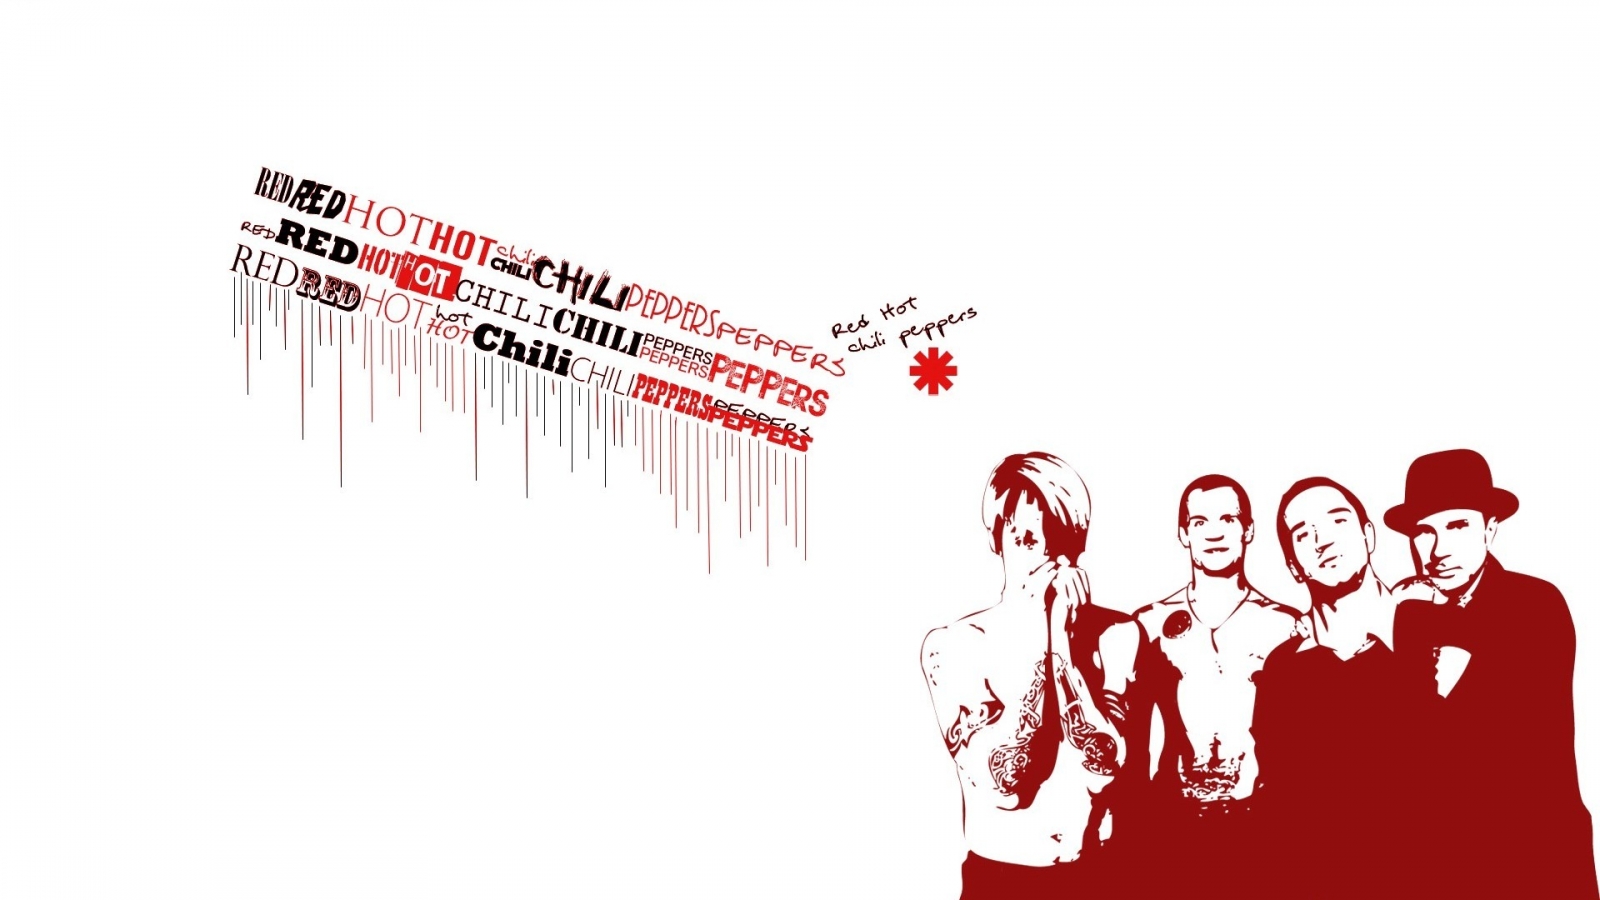 Red Hot Chili Peppers Poster for 1600 x 900 HDTV resolution